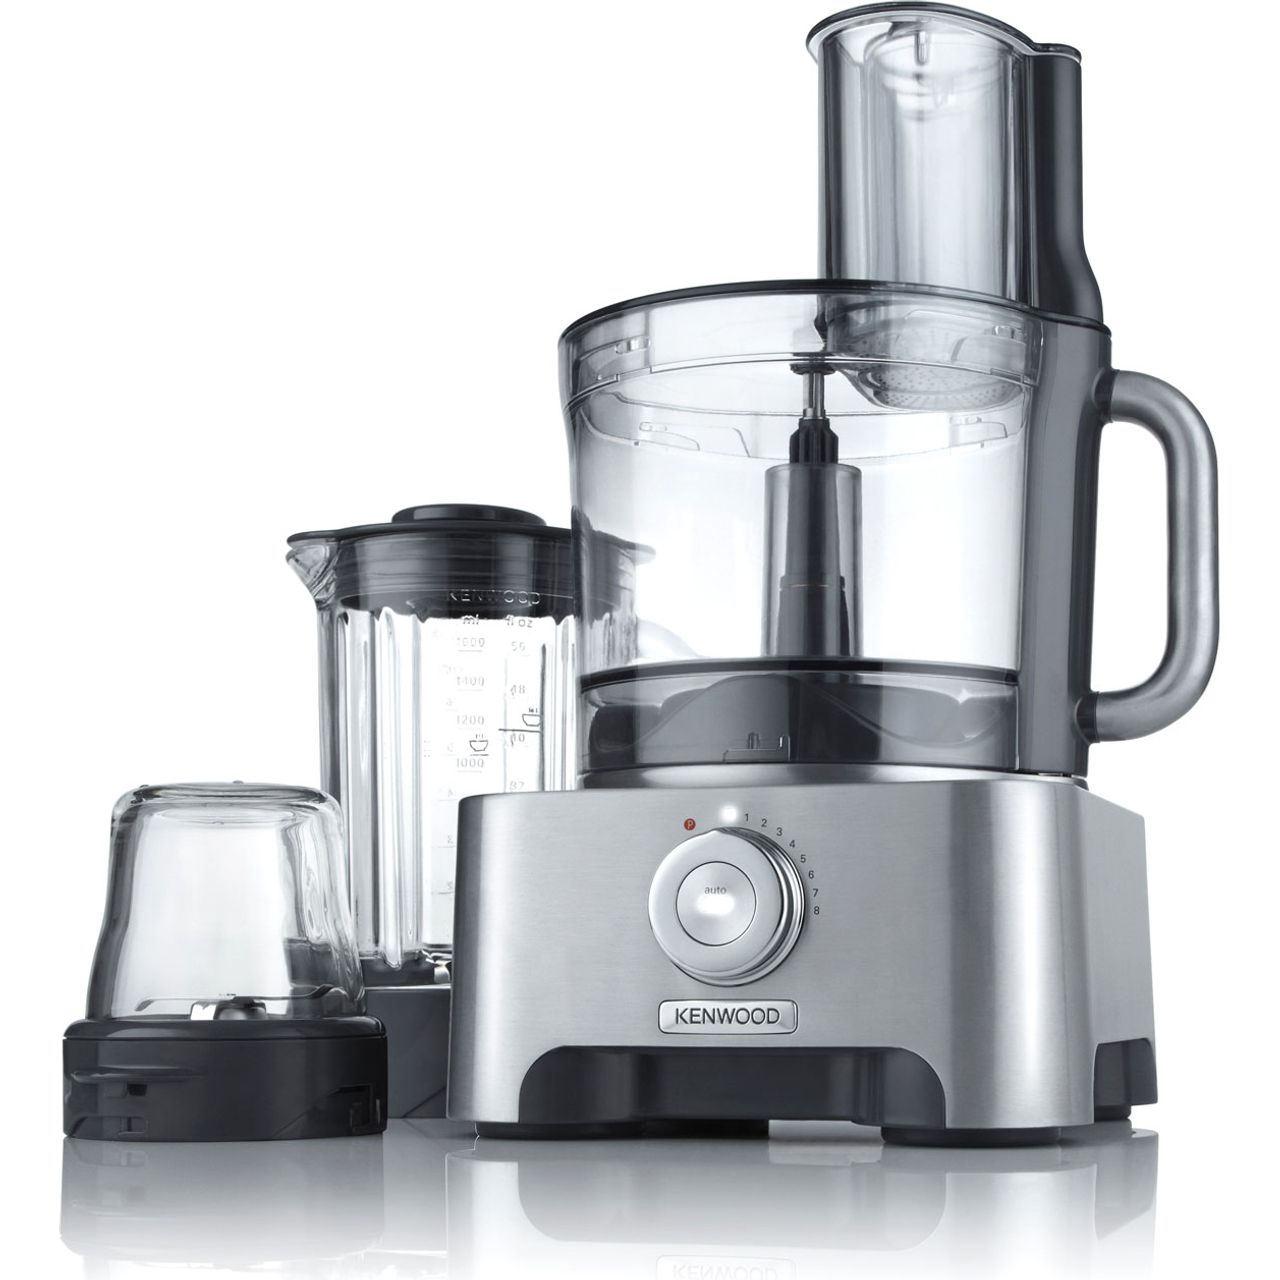 Kenwood MultiPro Excel FPM910 Food Processor With 12 Accessories Review